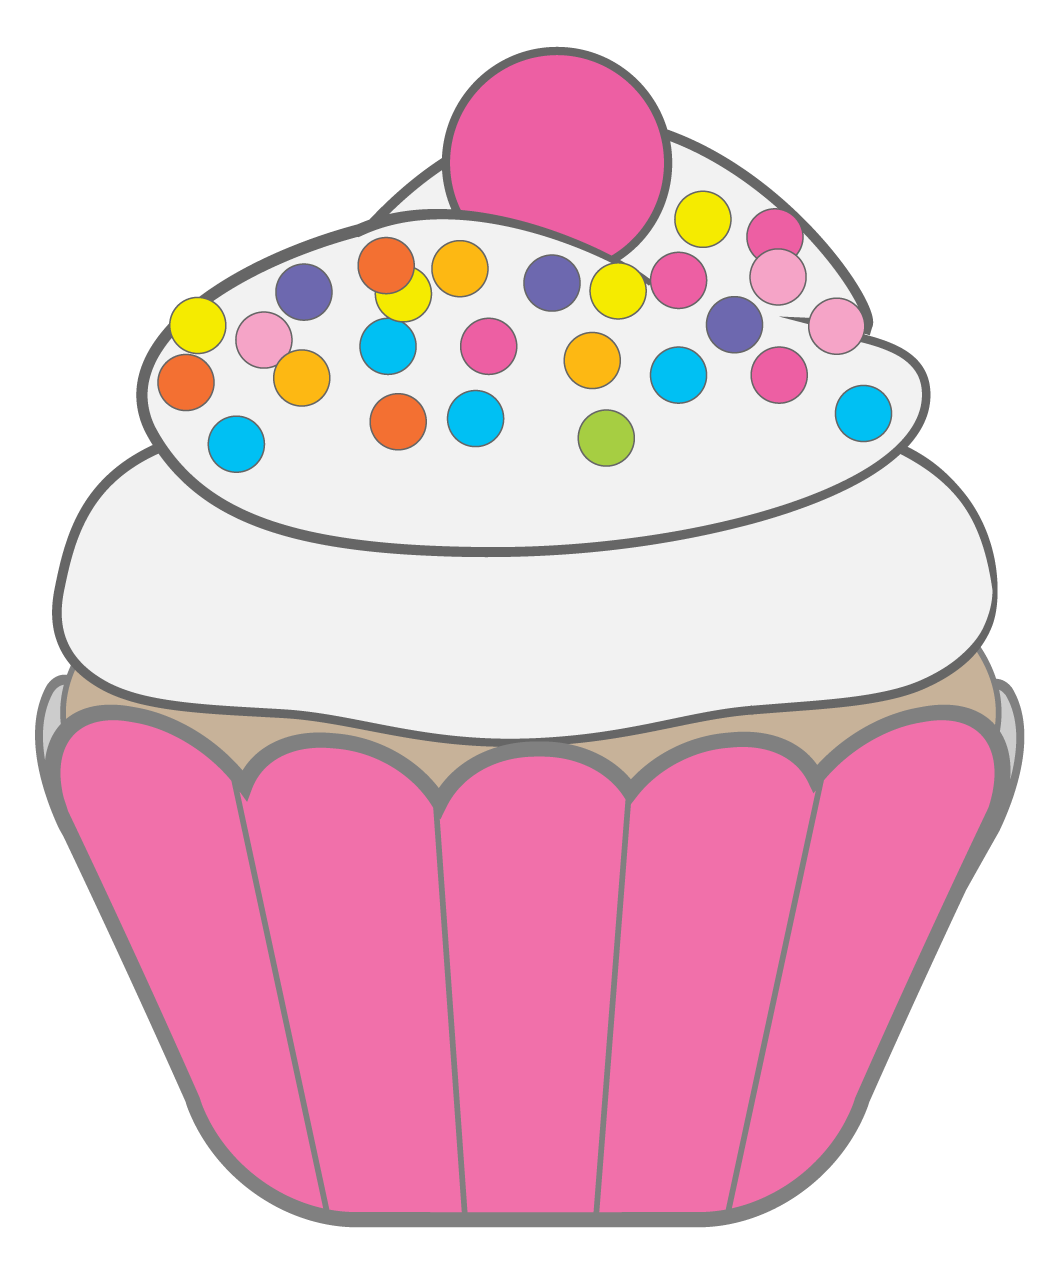 Clipart summer cupcake. Cupcakes muffins by carol